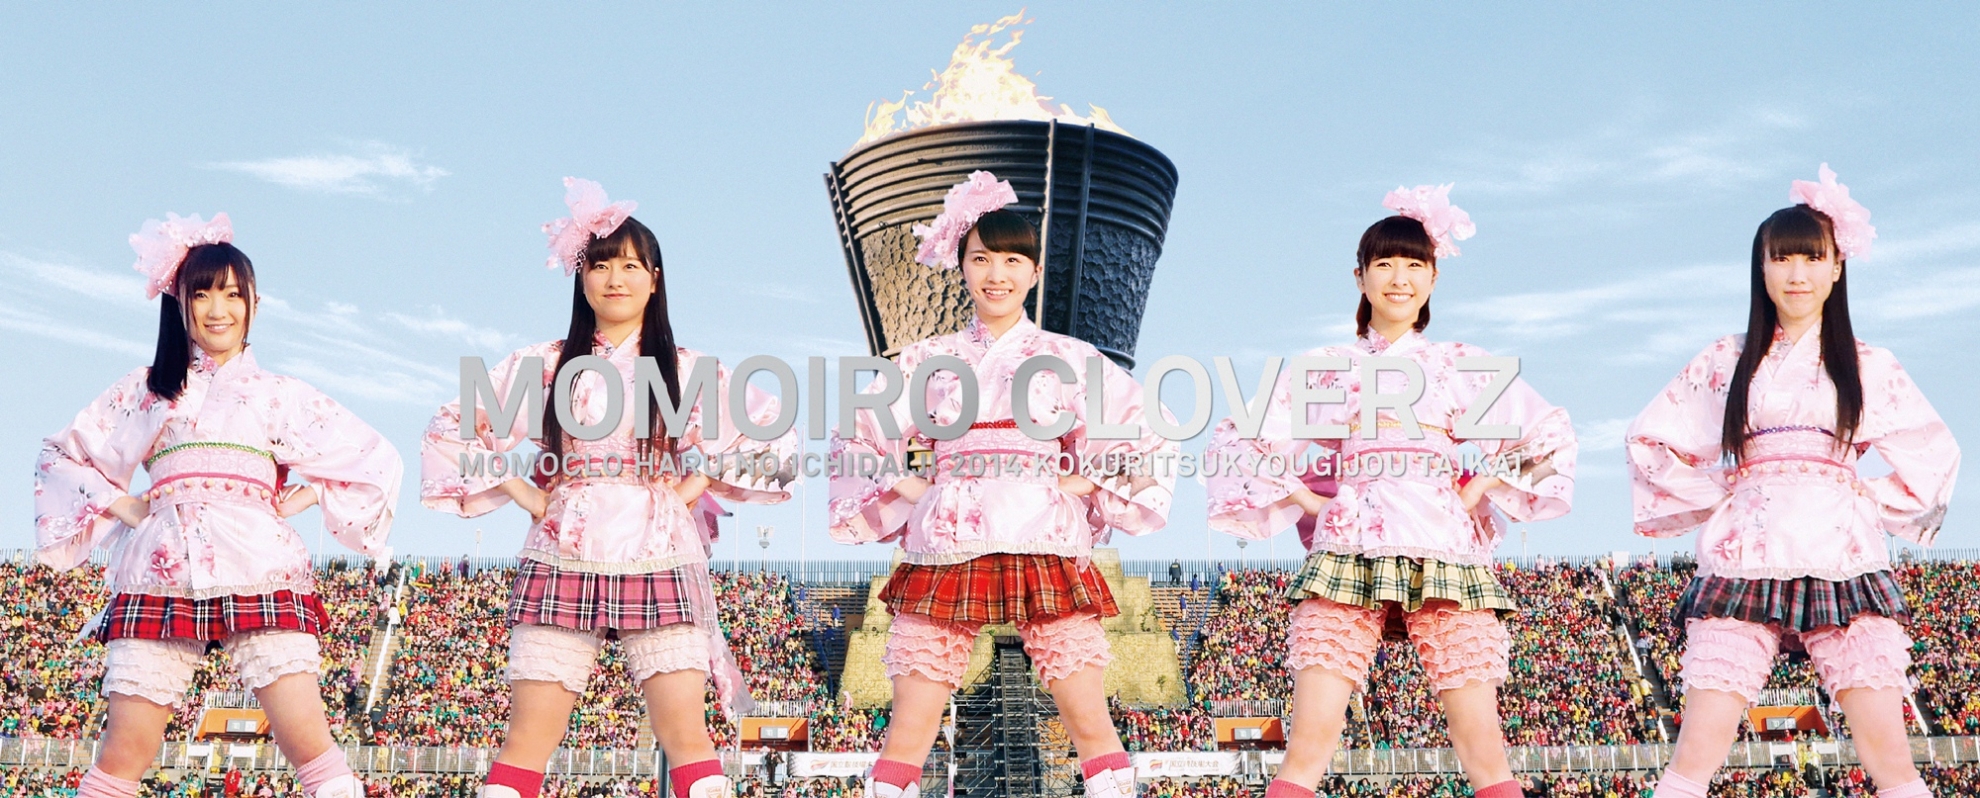 DVDs of Momoclo’s Kokuritsu Swept 1st and 2nd on Oricon Weekly Chart!!